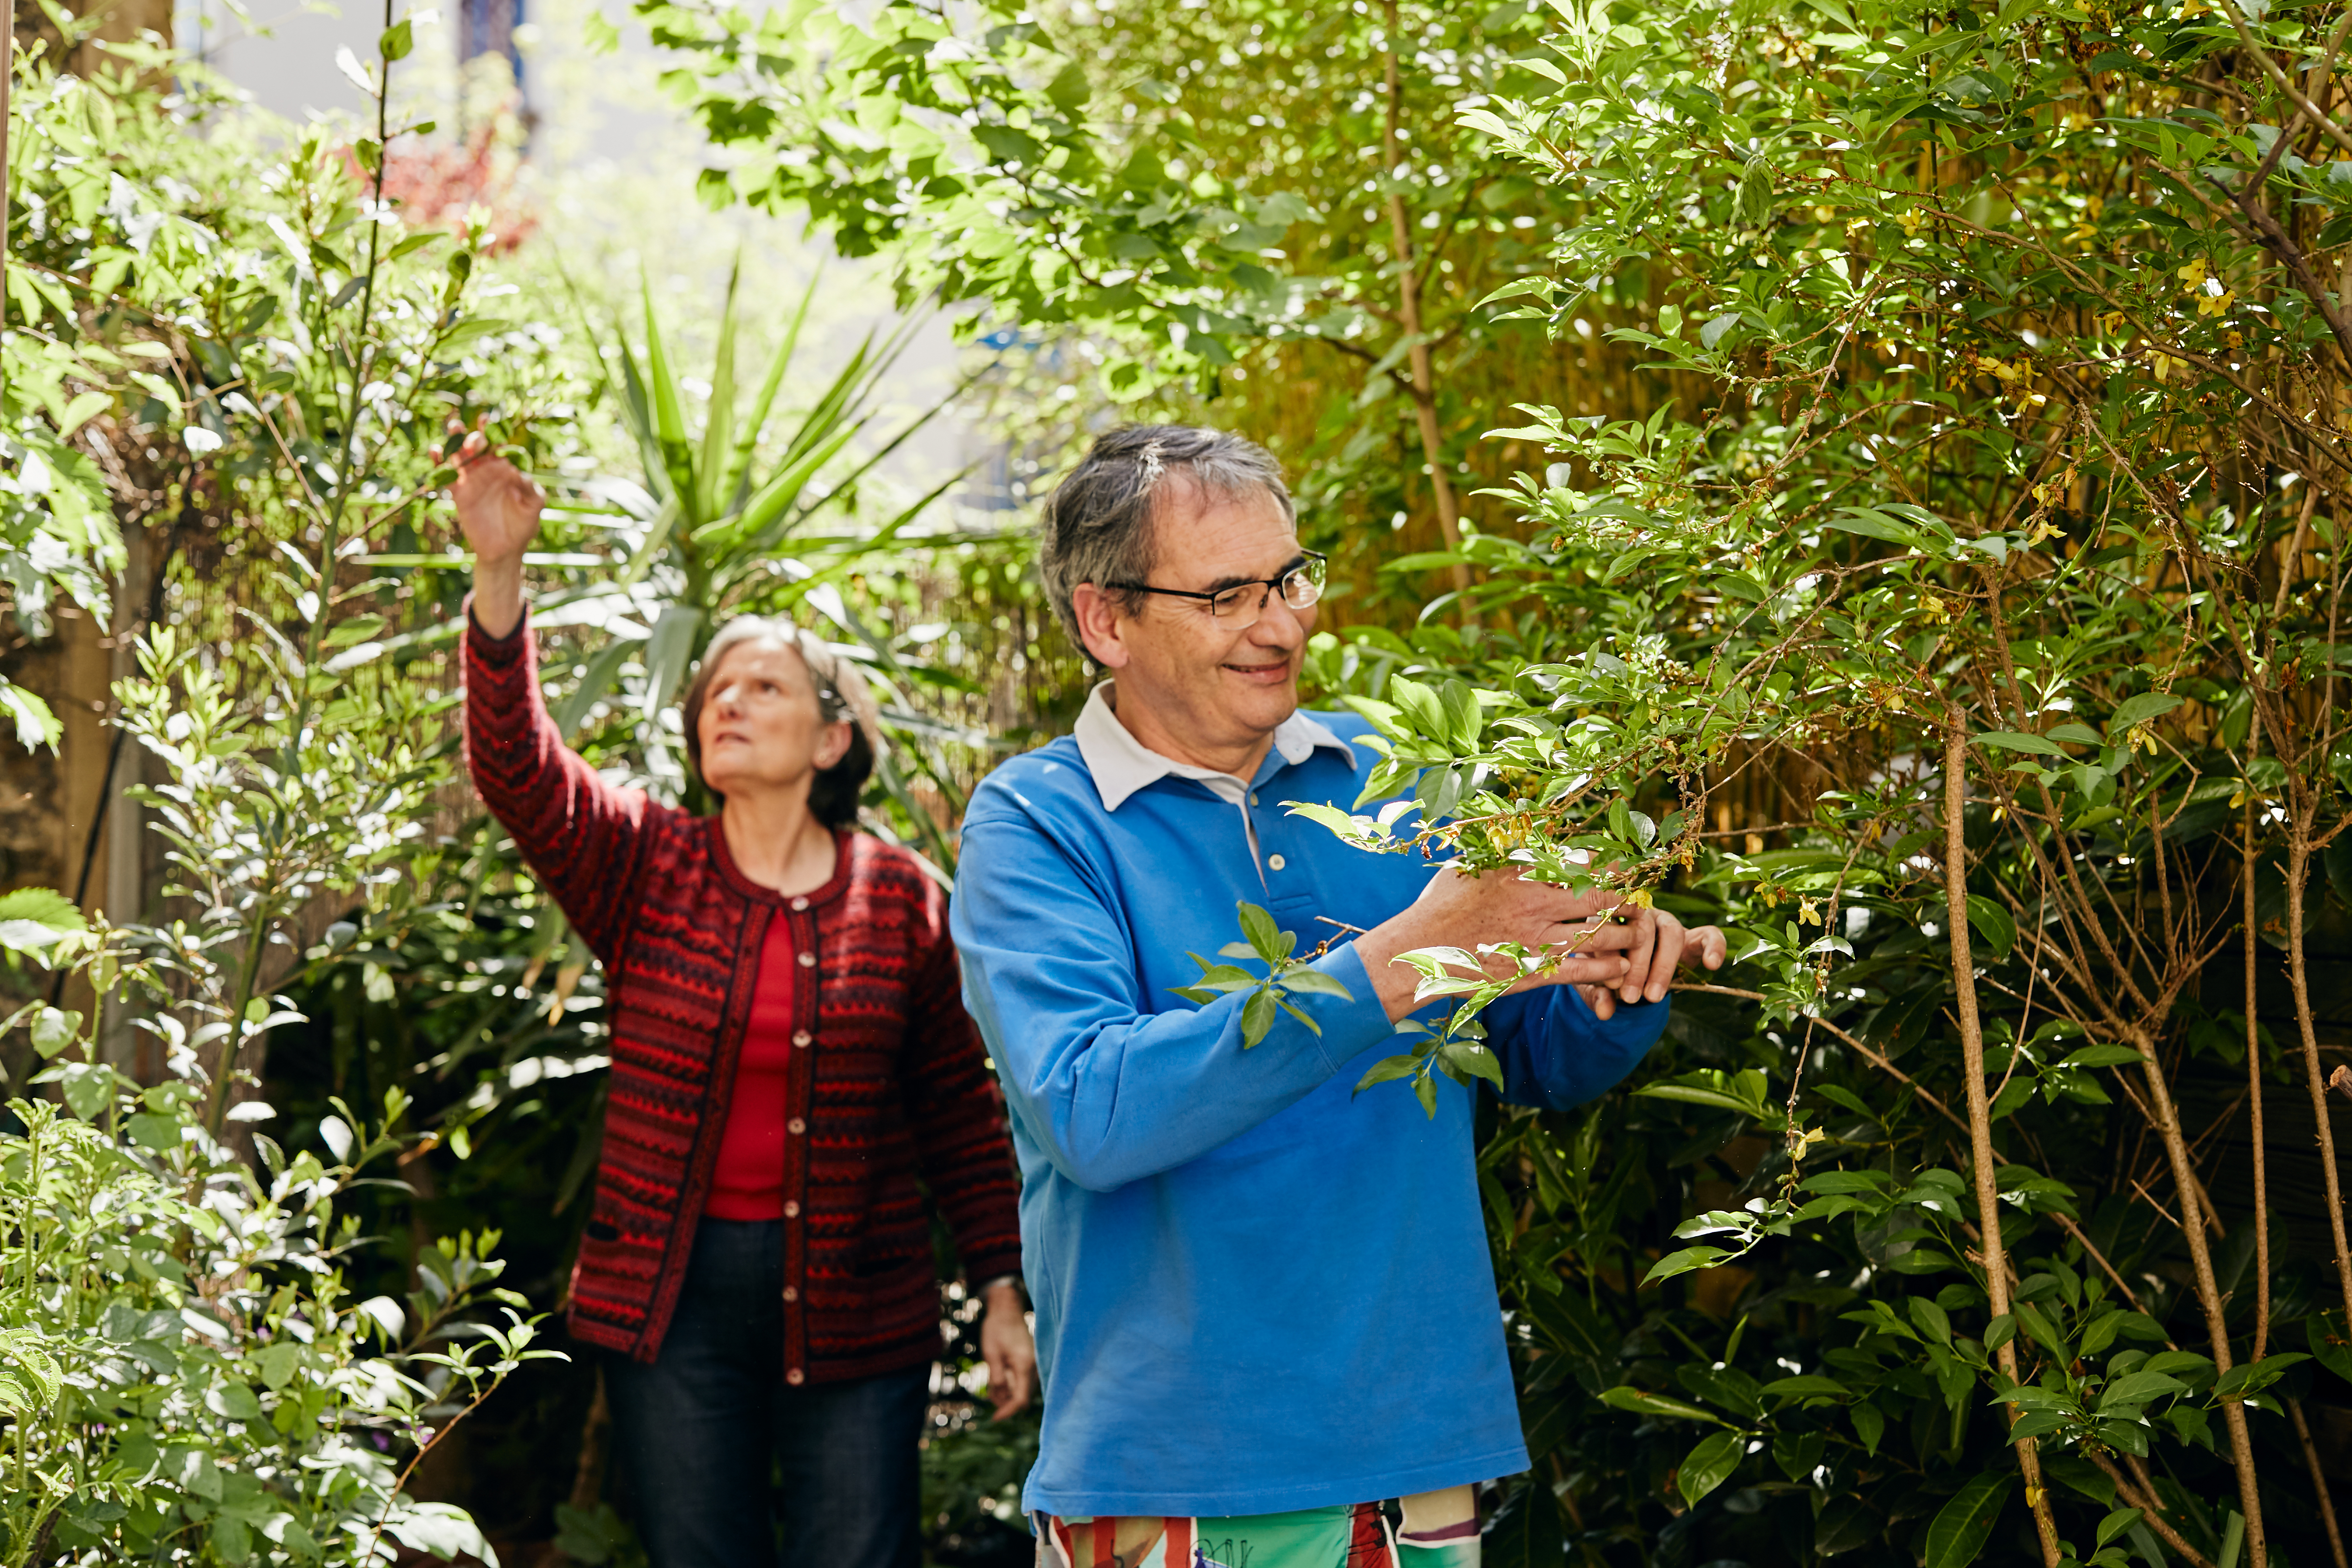 A woman and smiling man touch plants in a garden